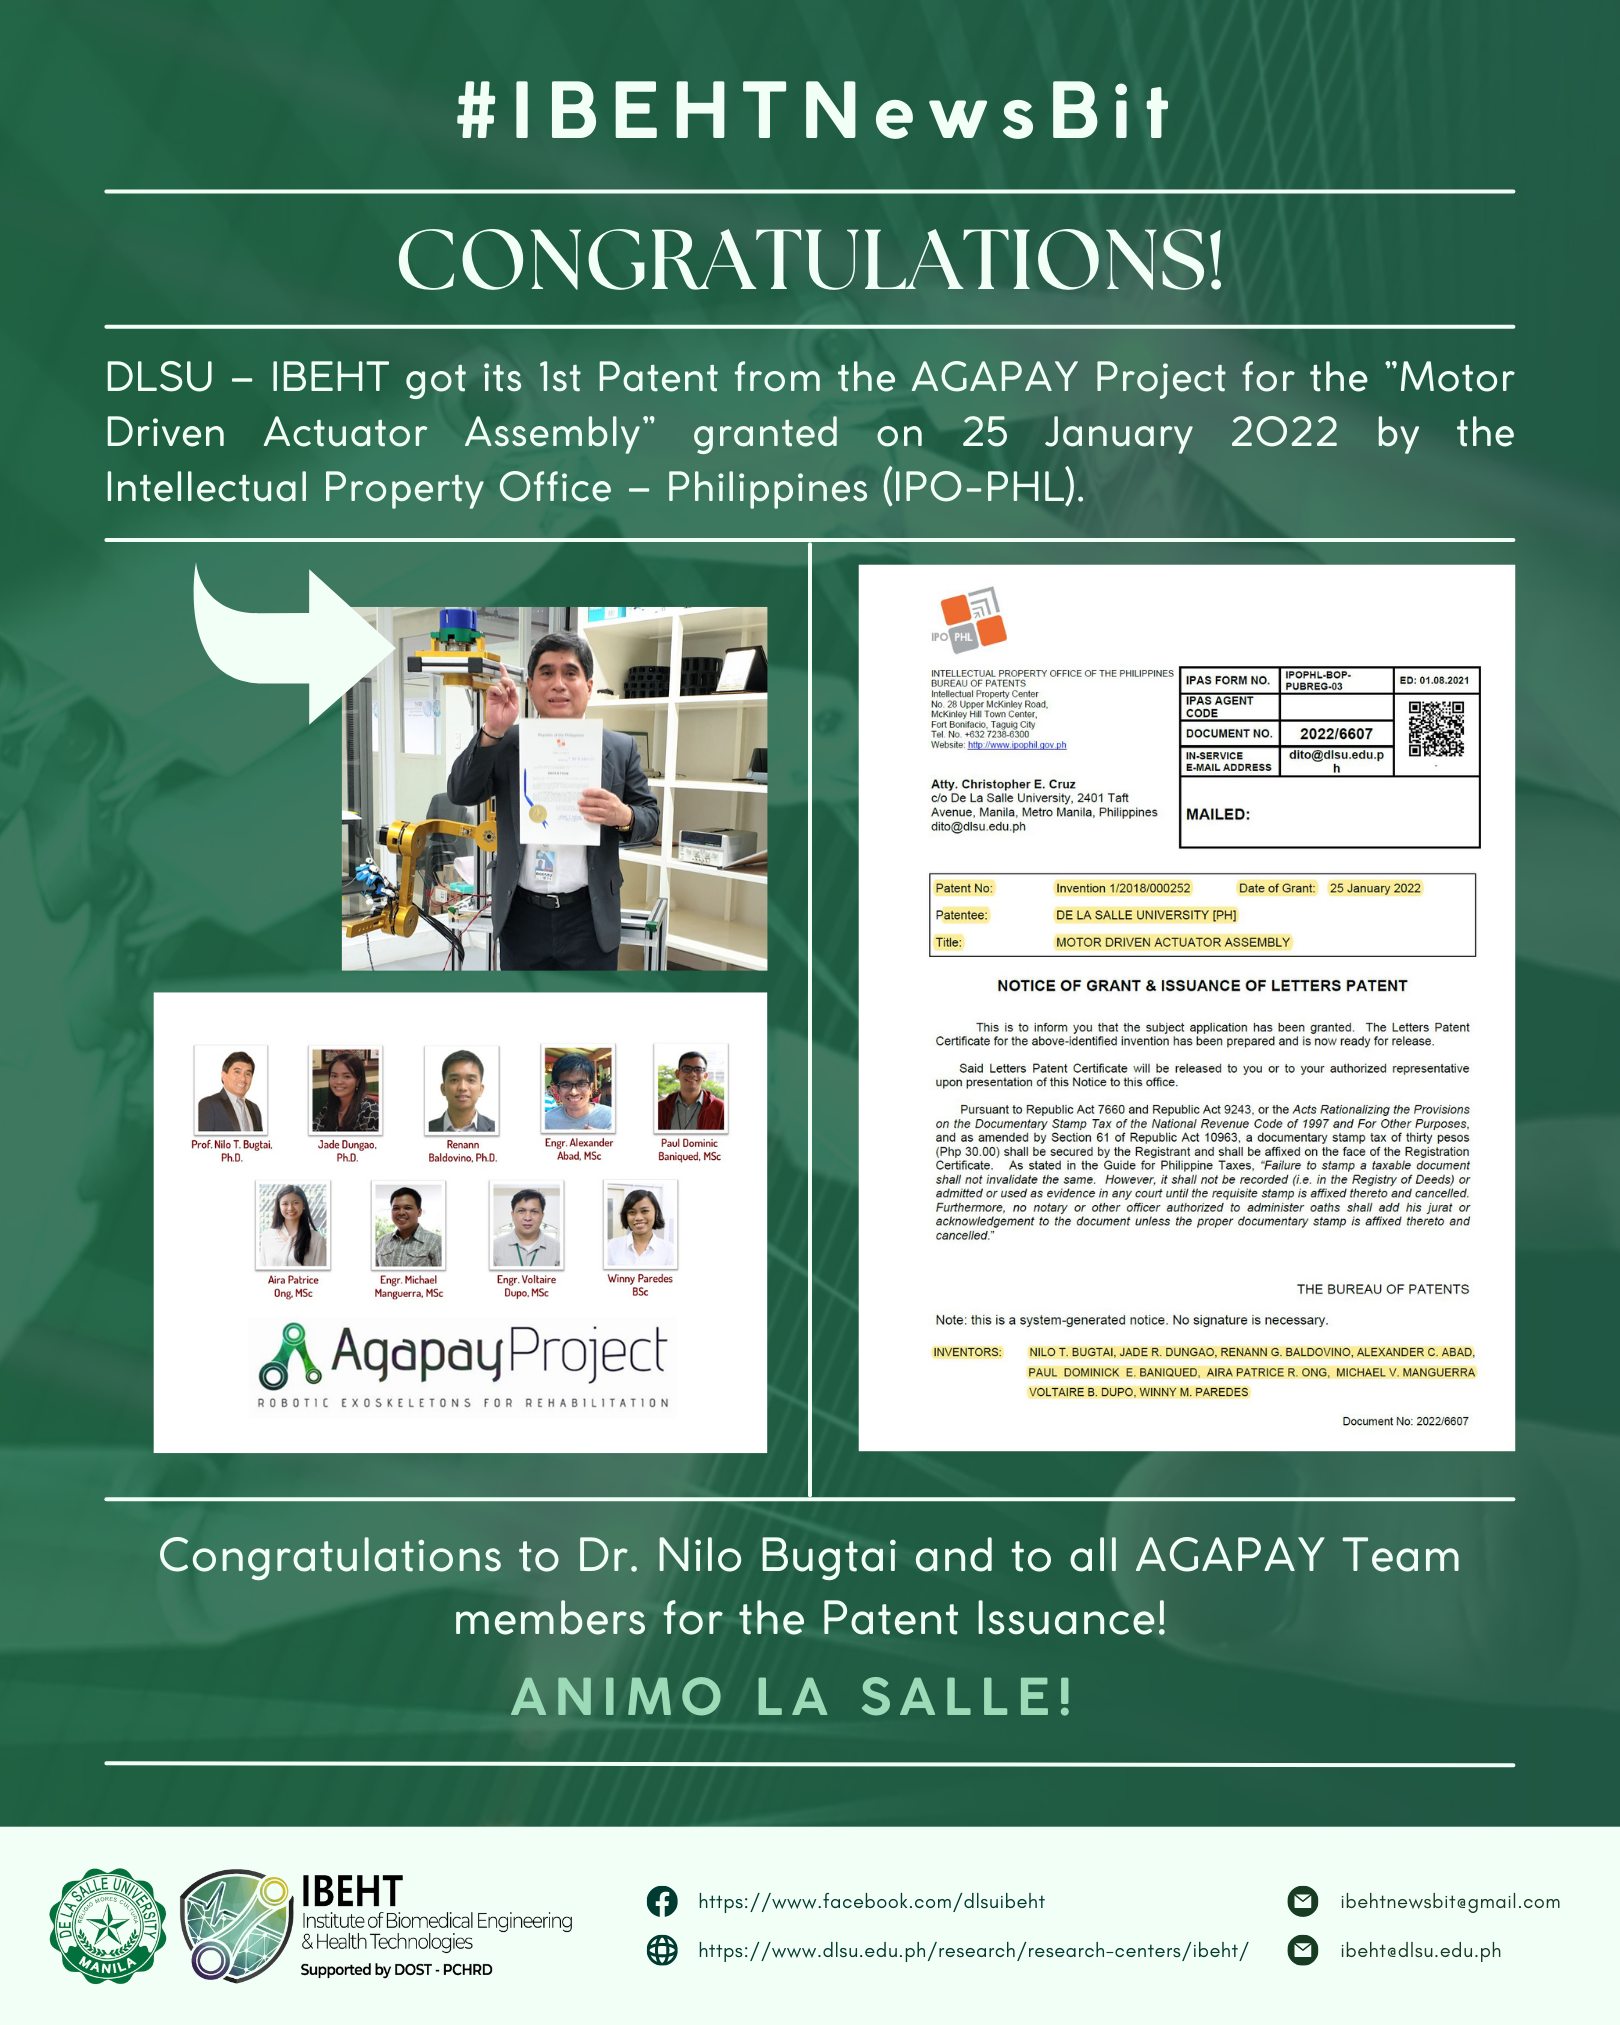 DLSU-IBEHT’s Agapay Project secures its first patent certificate